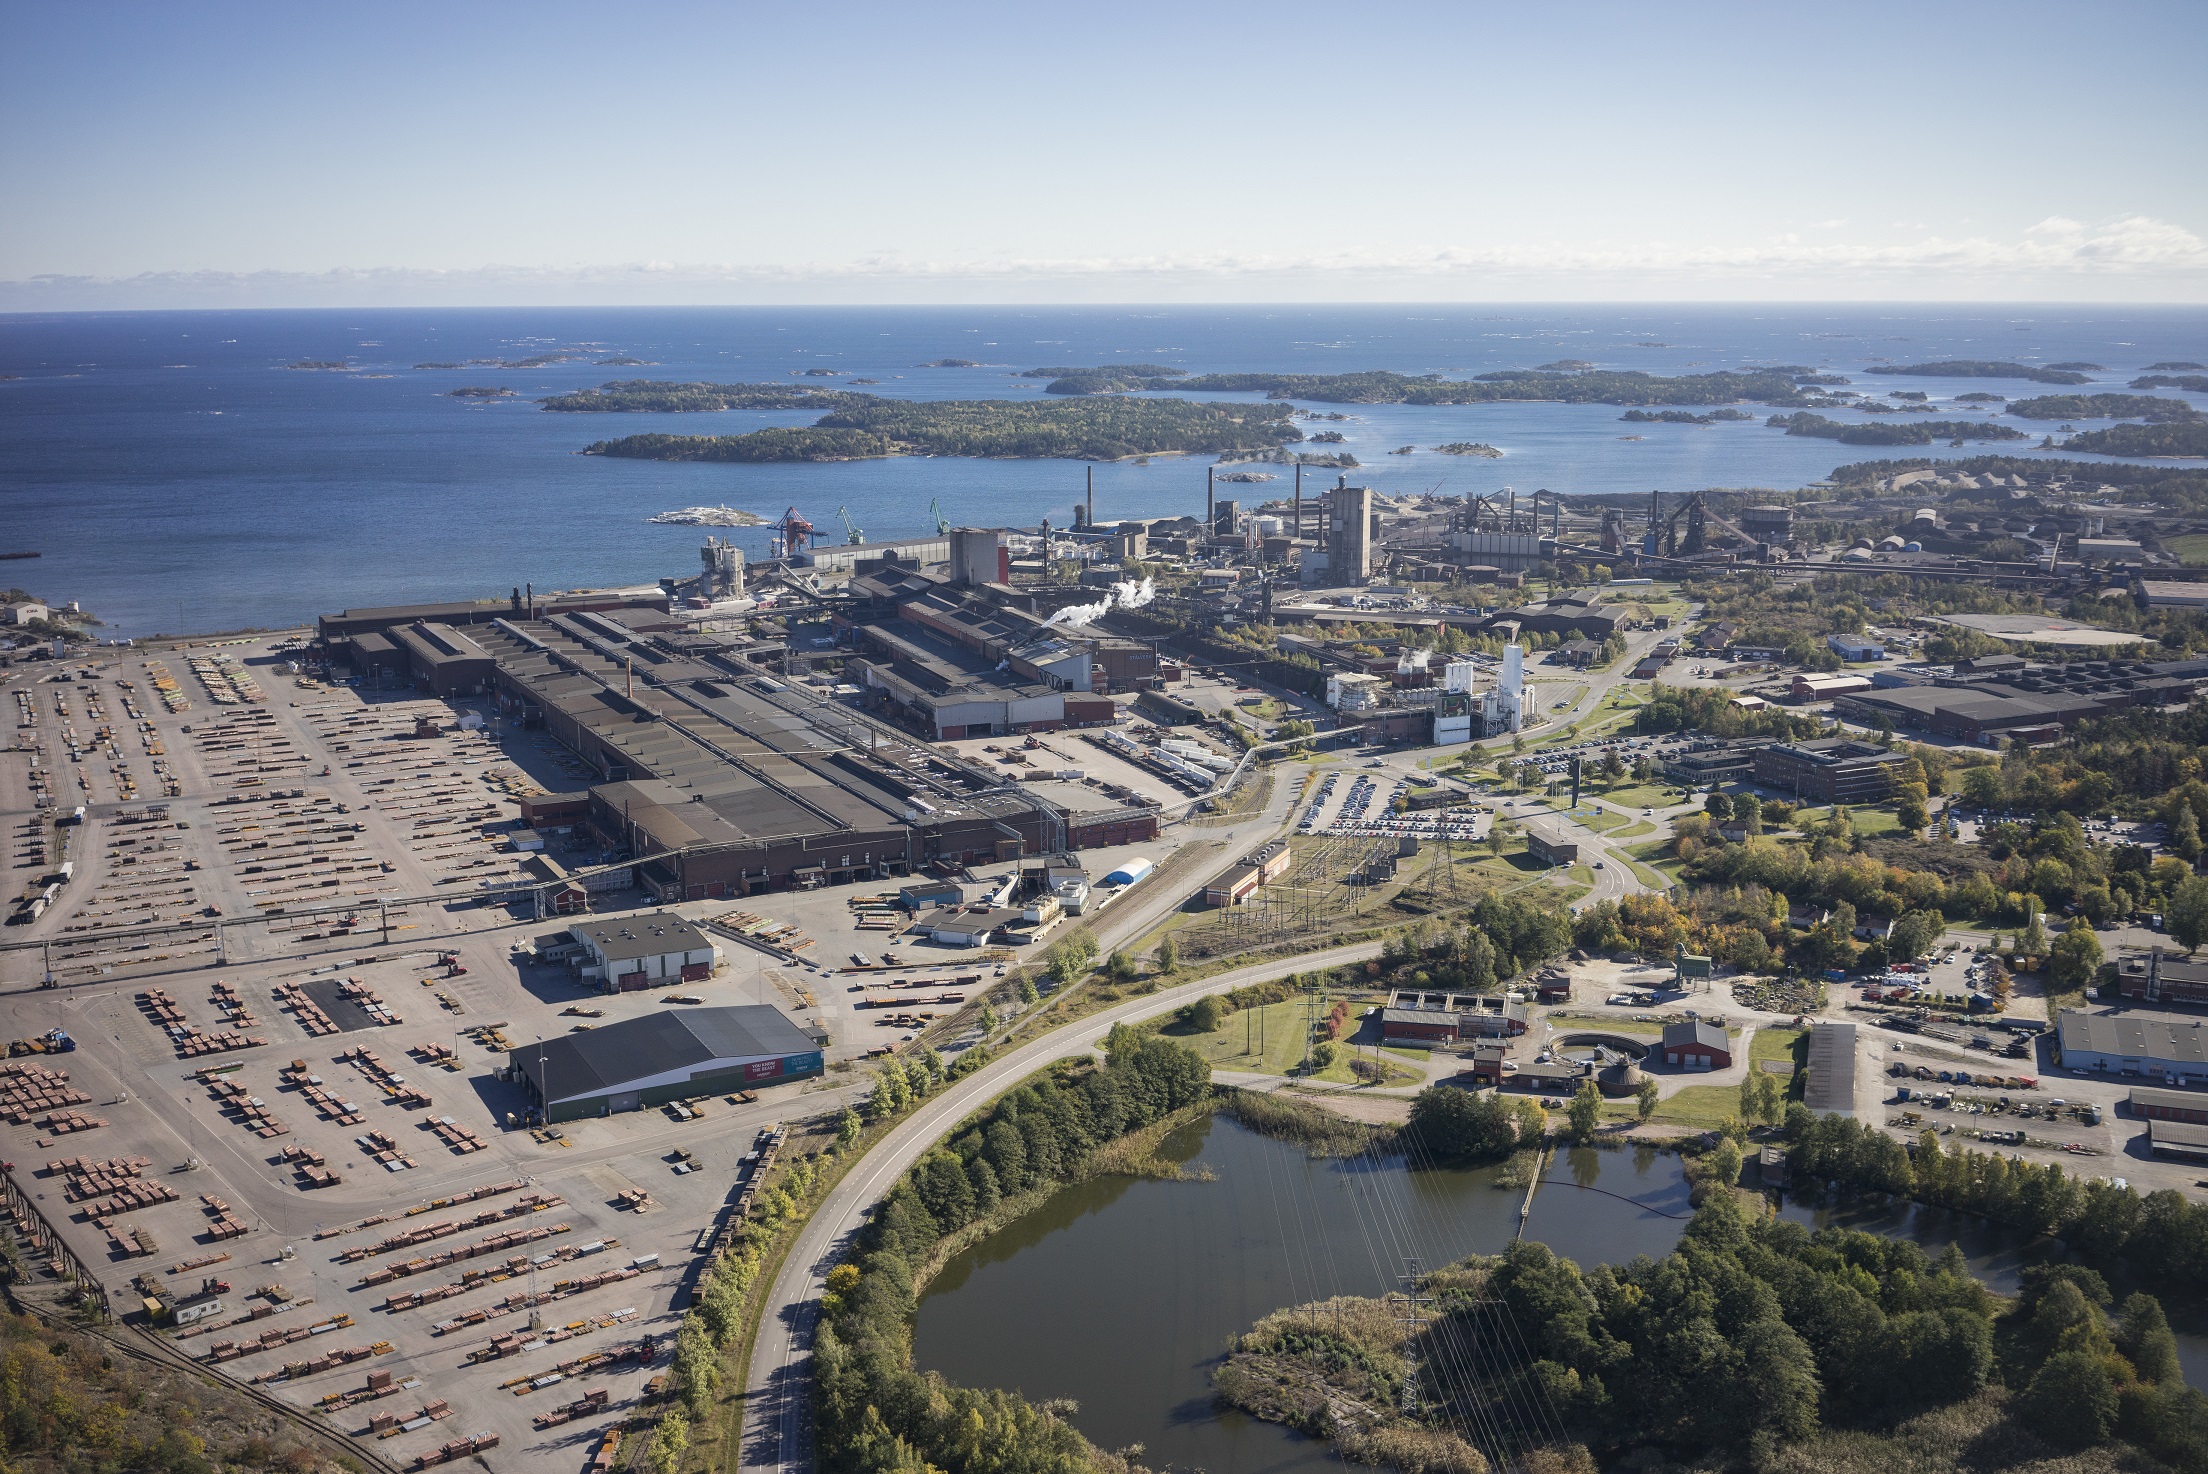 SSAB concludes IJmuiden discussions with Tata Steel